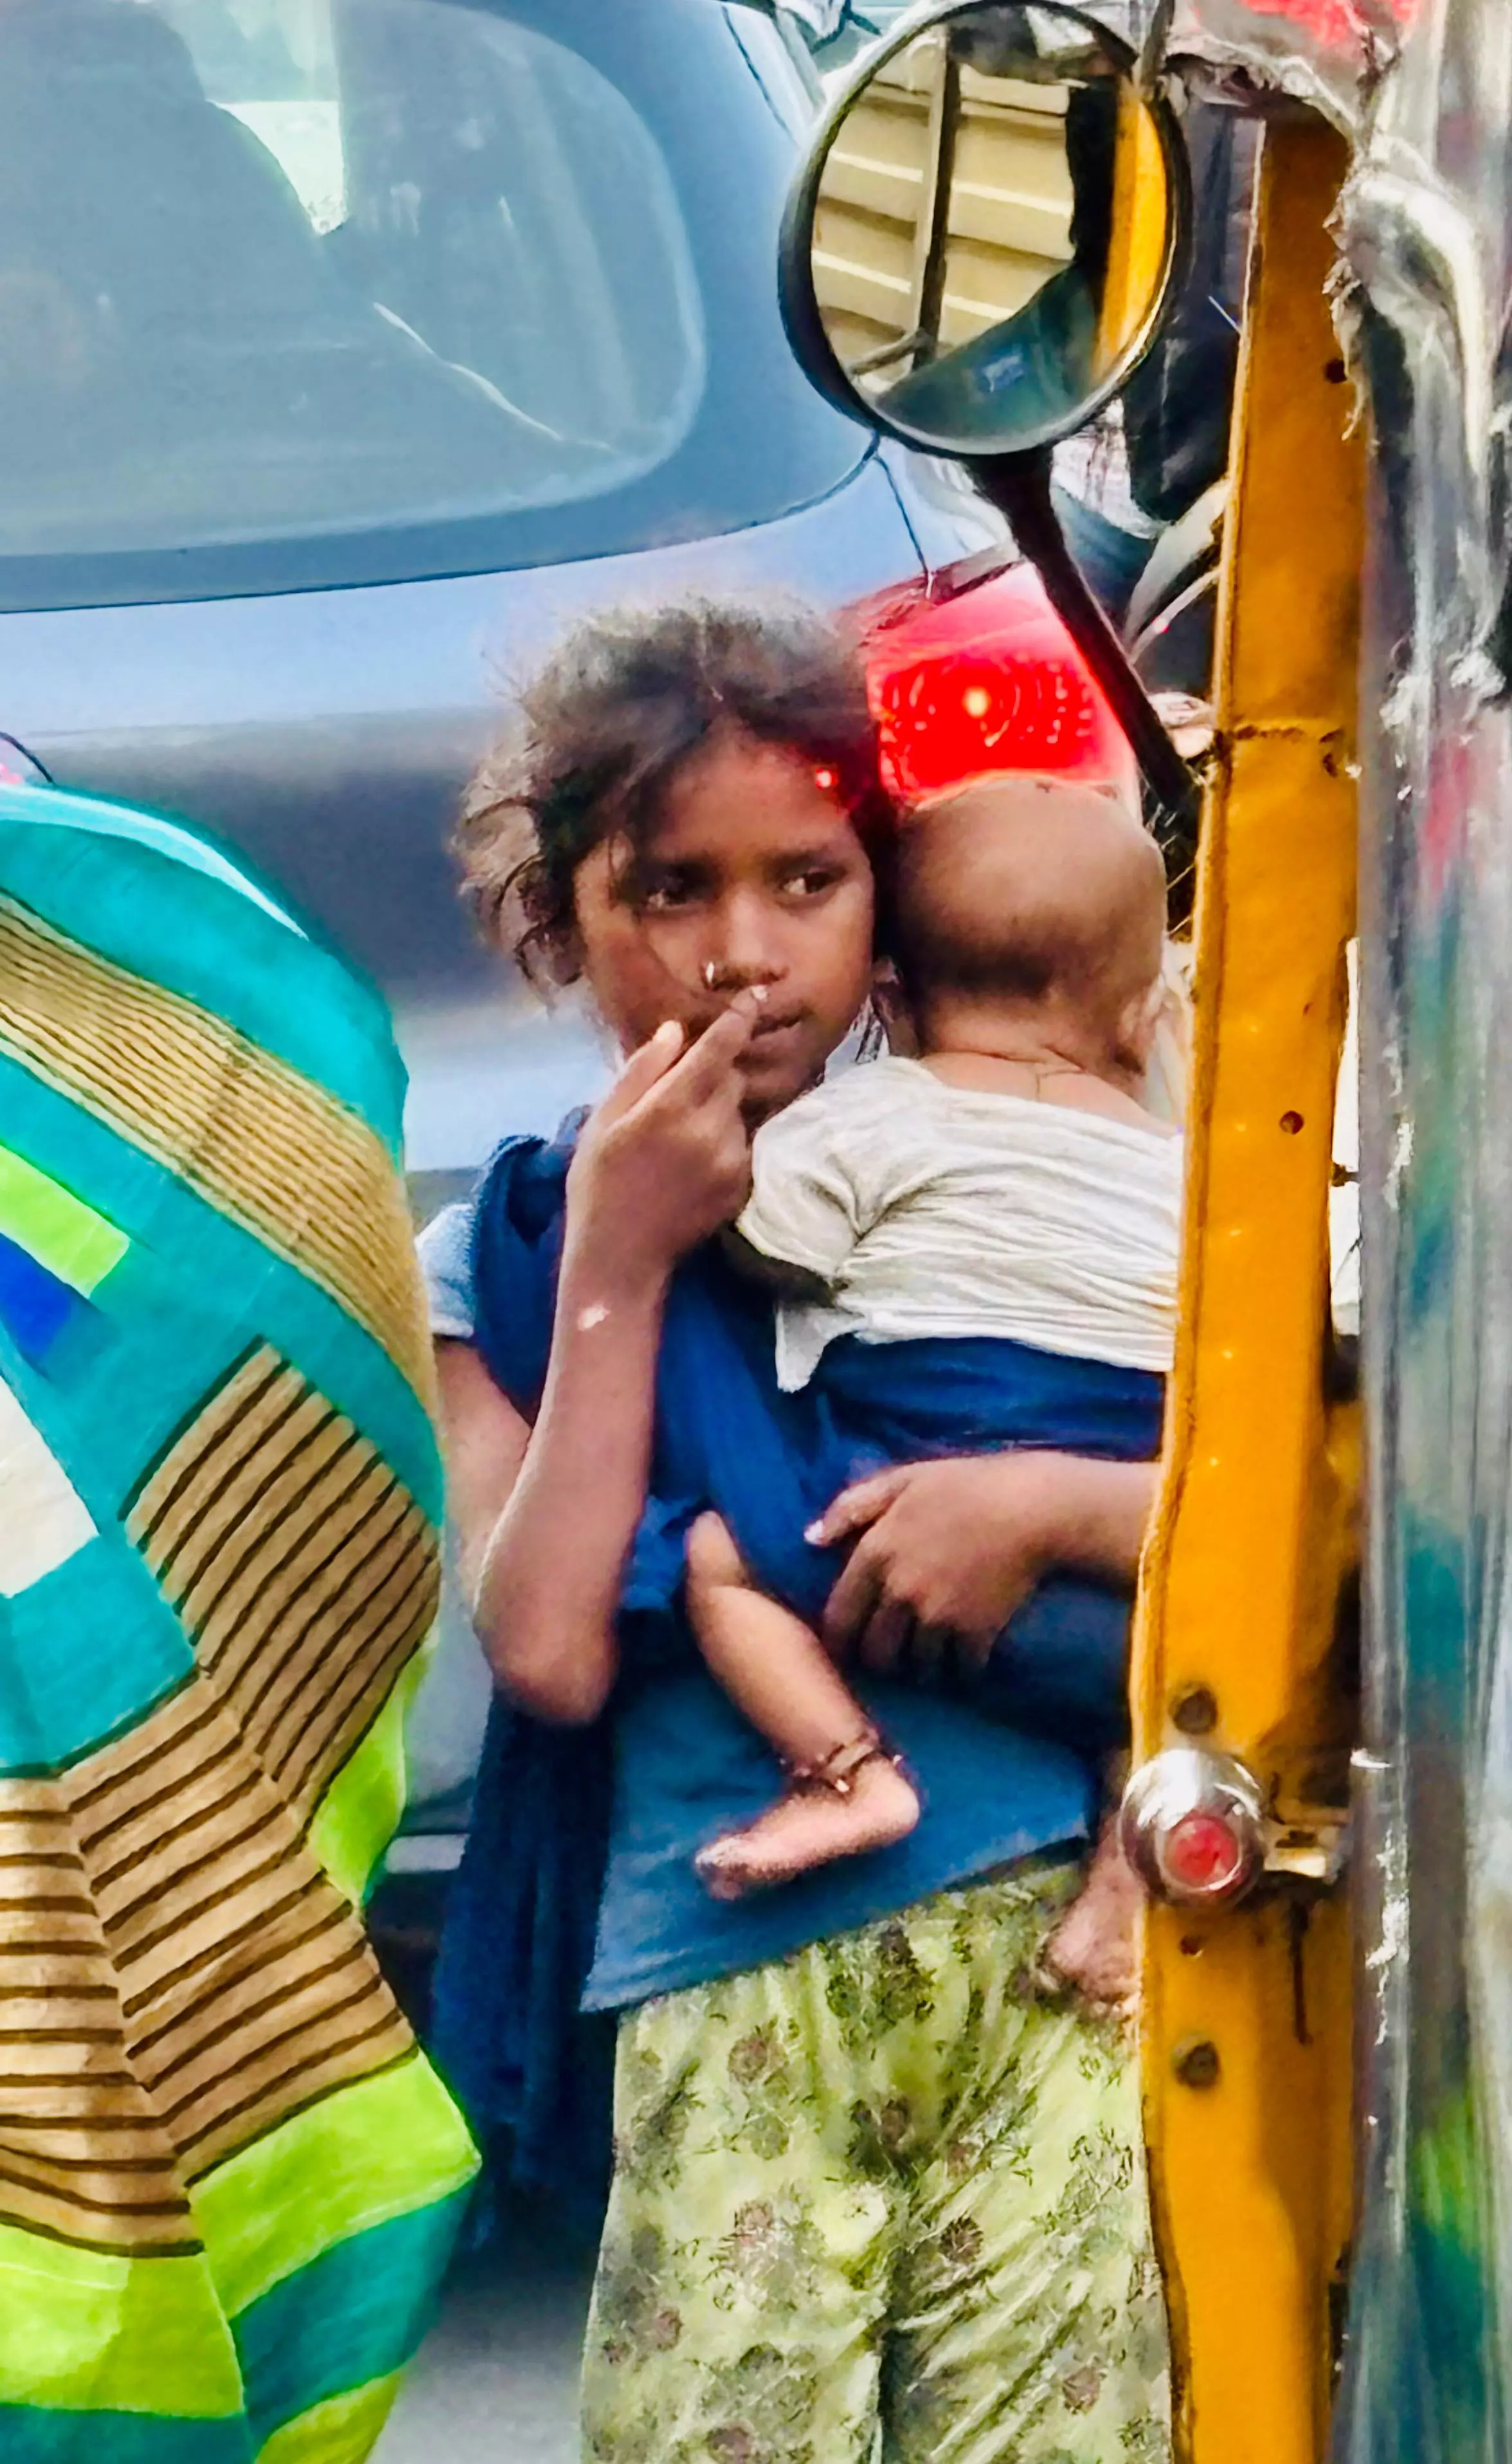 Hyderabad: Children continue to beg on streets even as officials claim rehab ops are underway